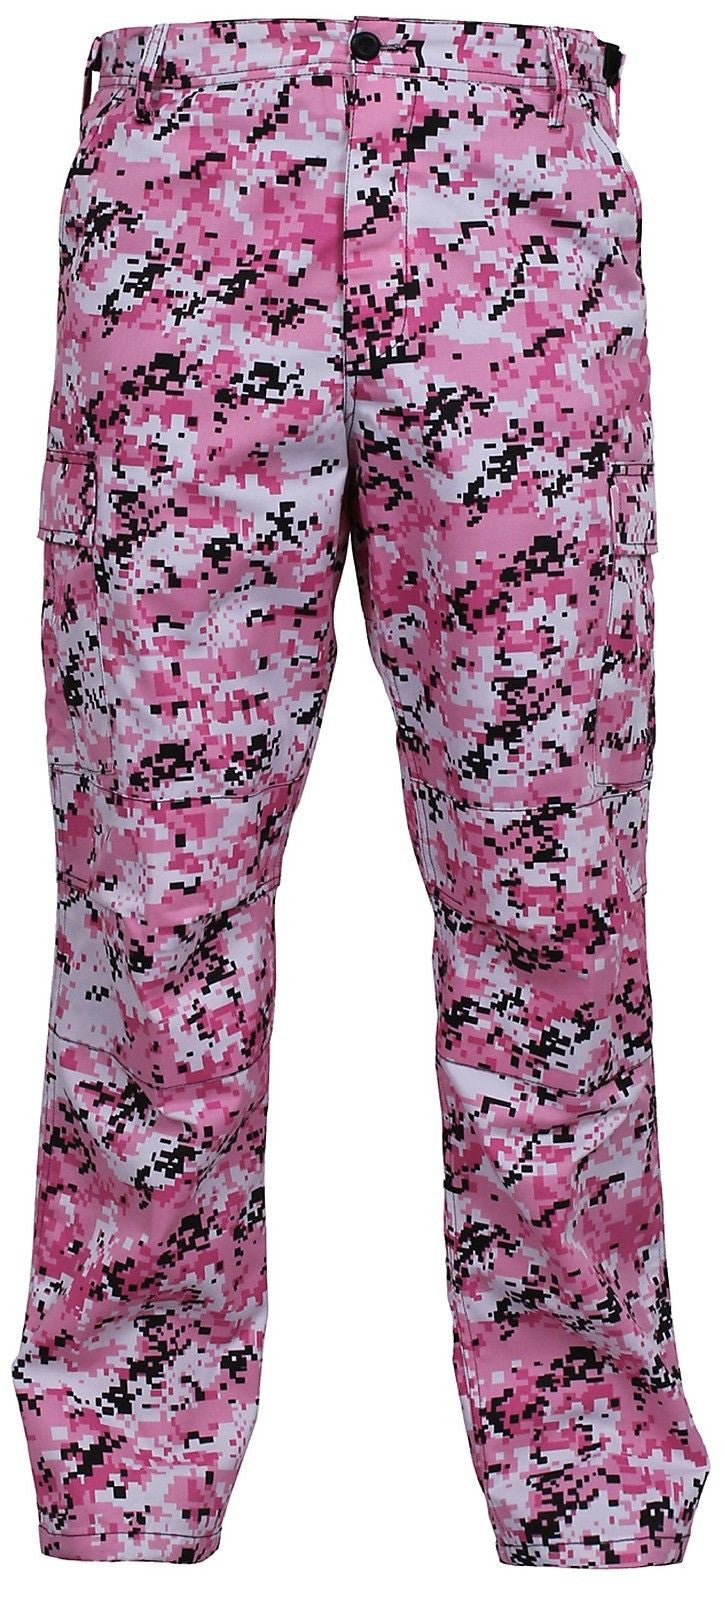 Red or Pink Digital Camouflage BDU Pants - Reinforced Military Style C ...